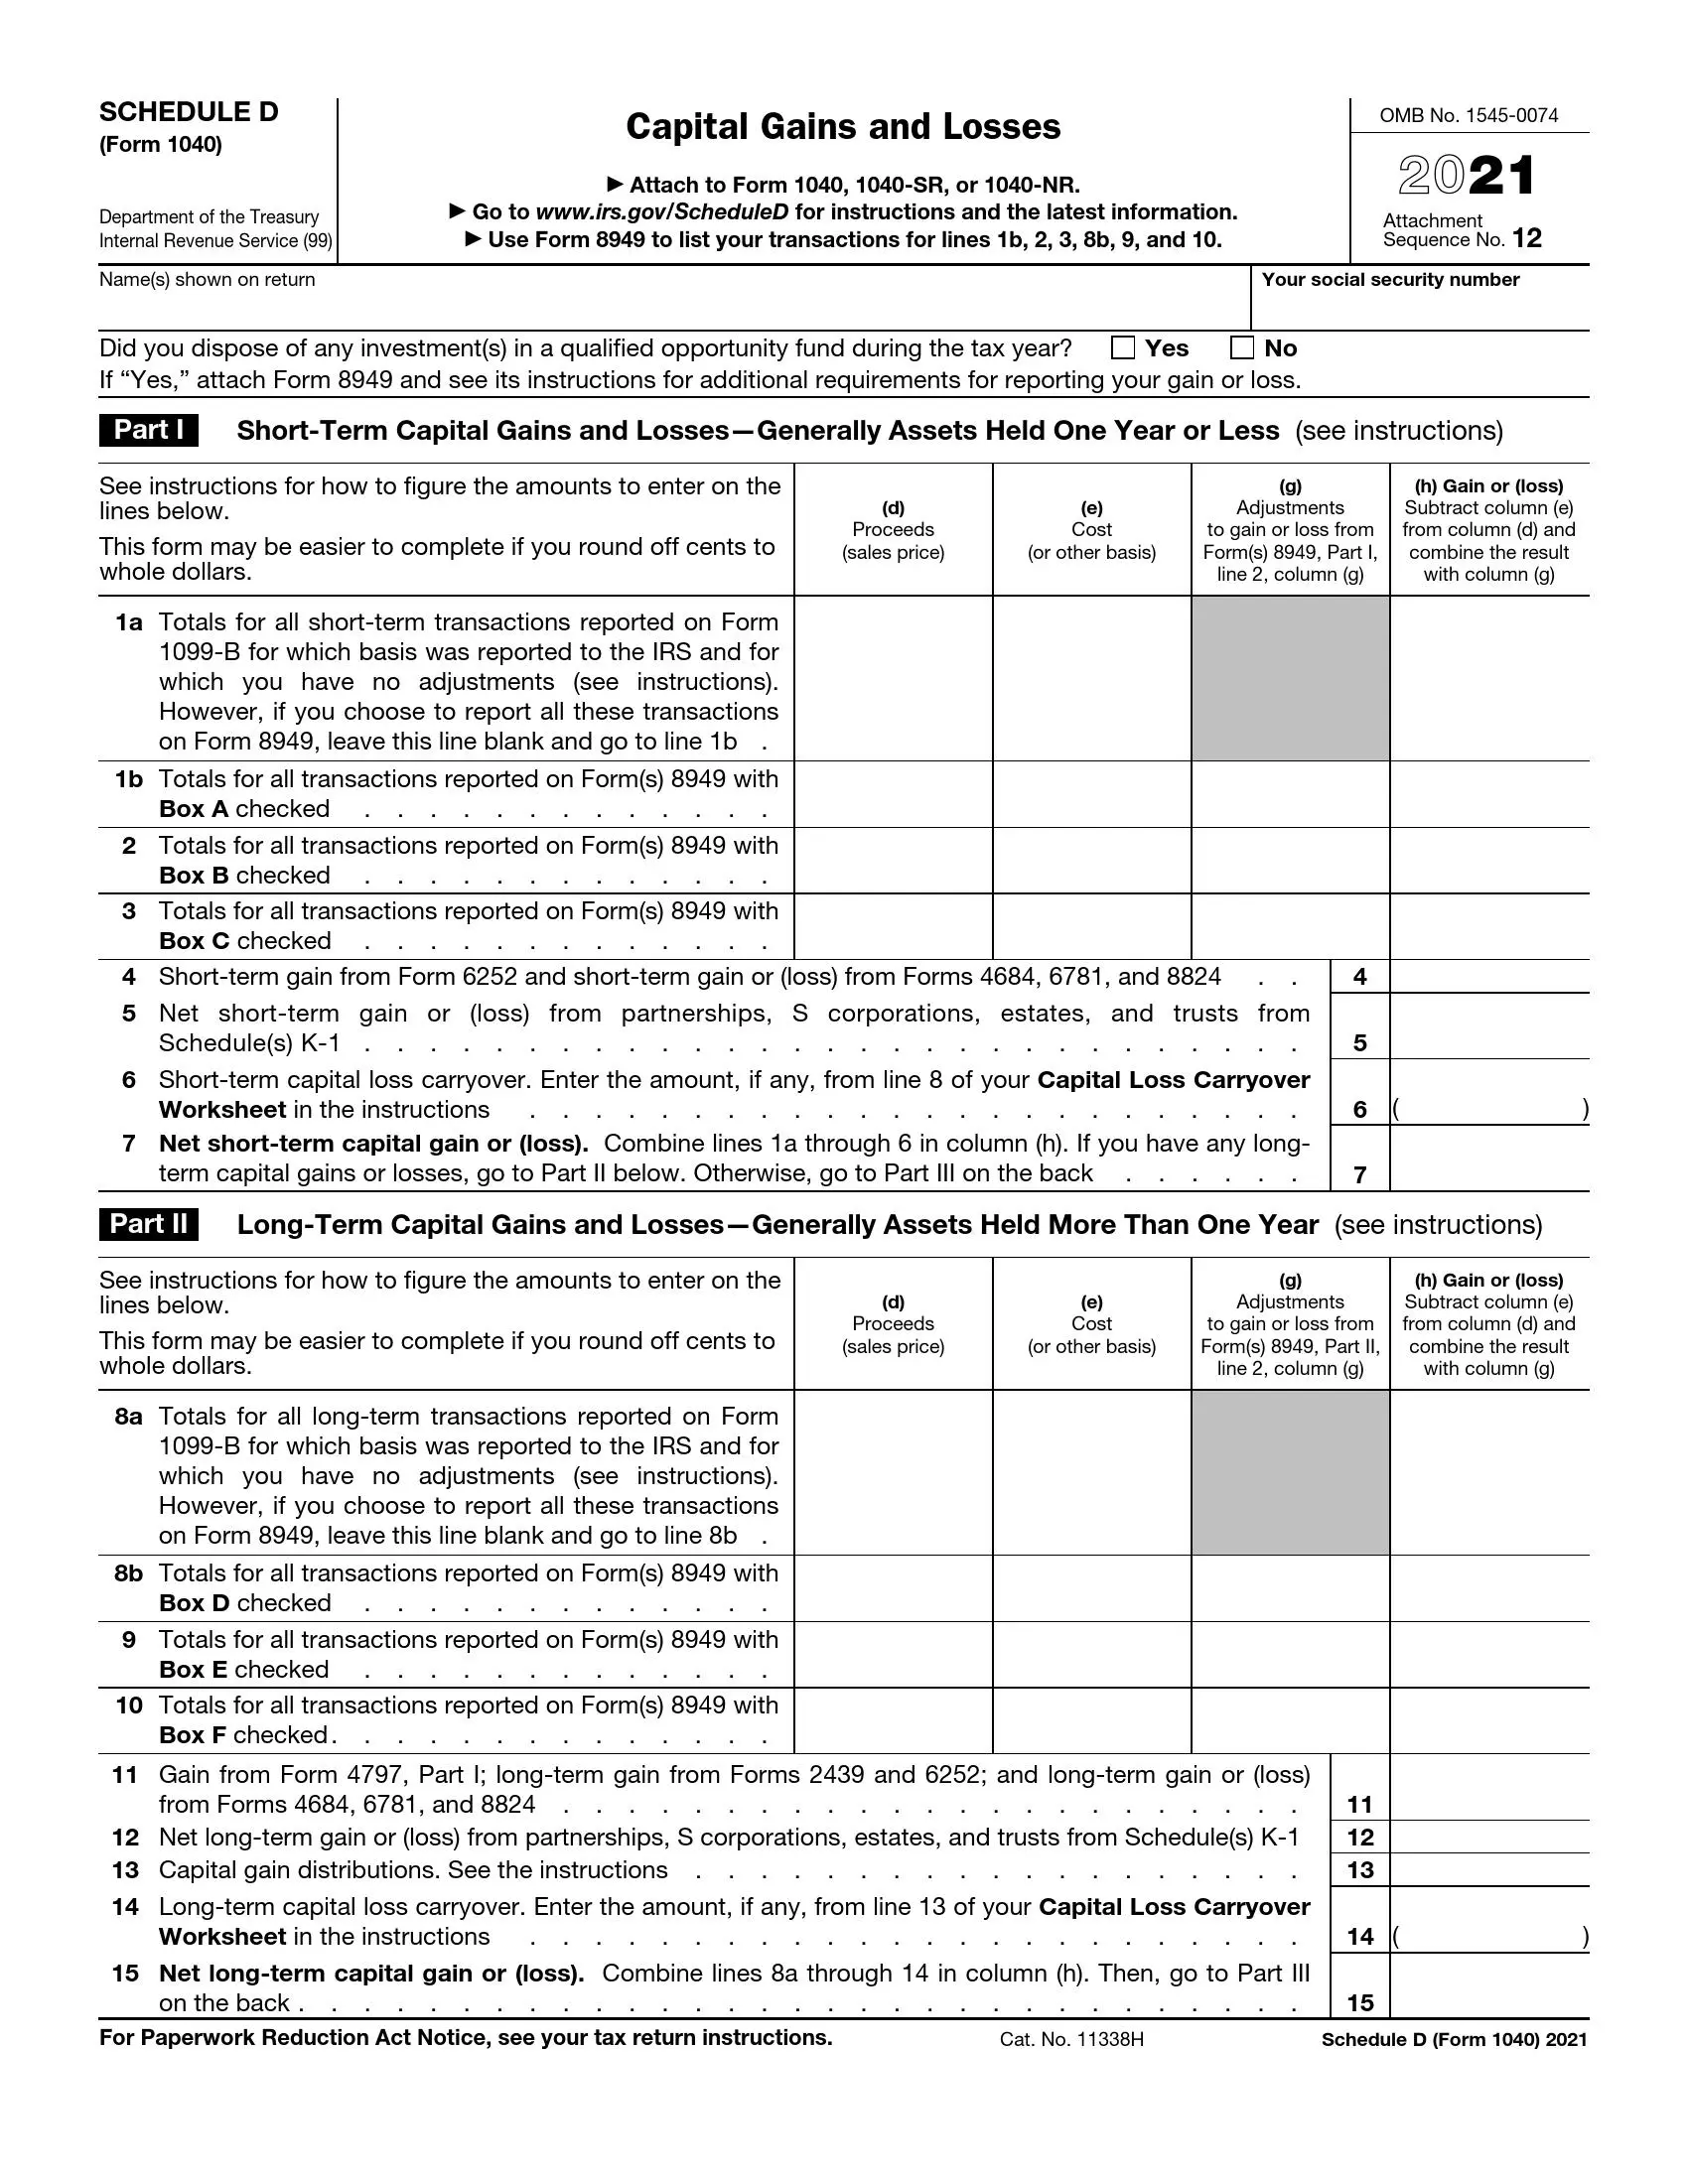 irs schedule d form 1040 or 1040 sr 2021 preview